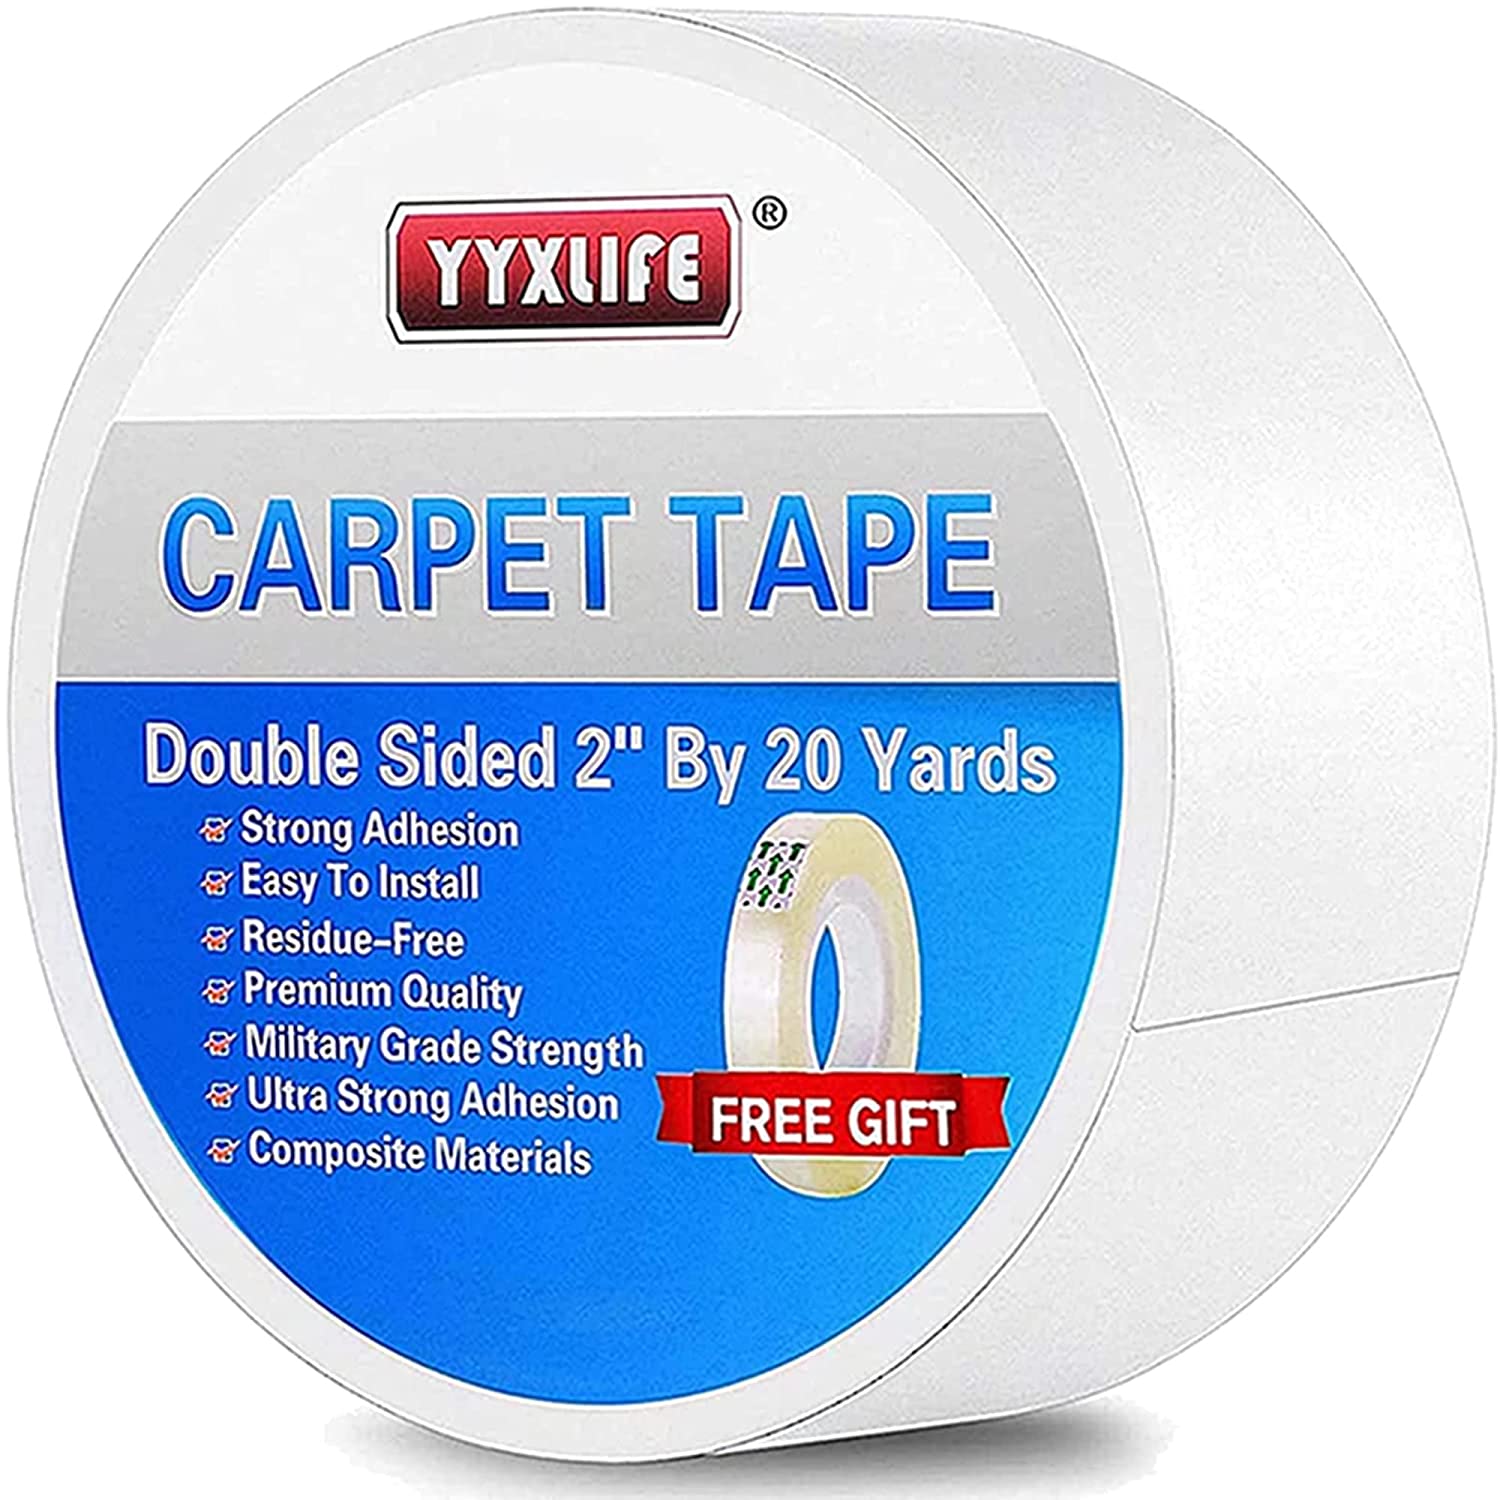 Shenzhenshi yuexiangruihua Kej ETERART Double Sided Carpet Tape Heavy Duty for Area Rugs,Tile Hardwood Floors,Over Carpet,Rug Tape High Adhesive and